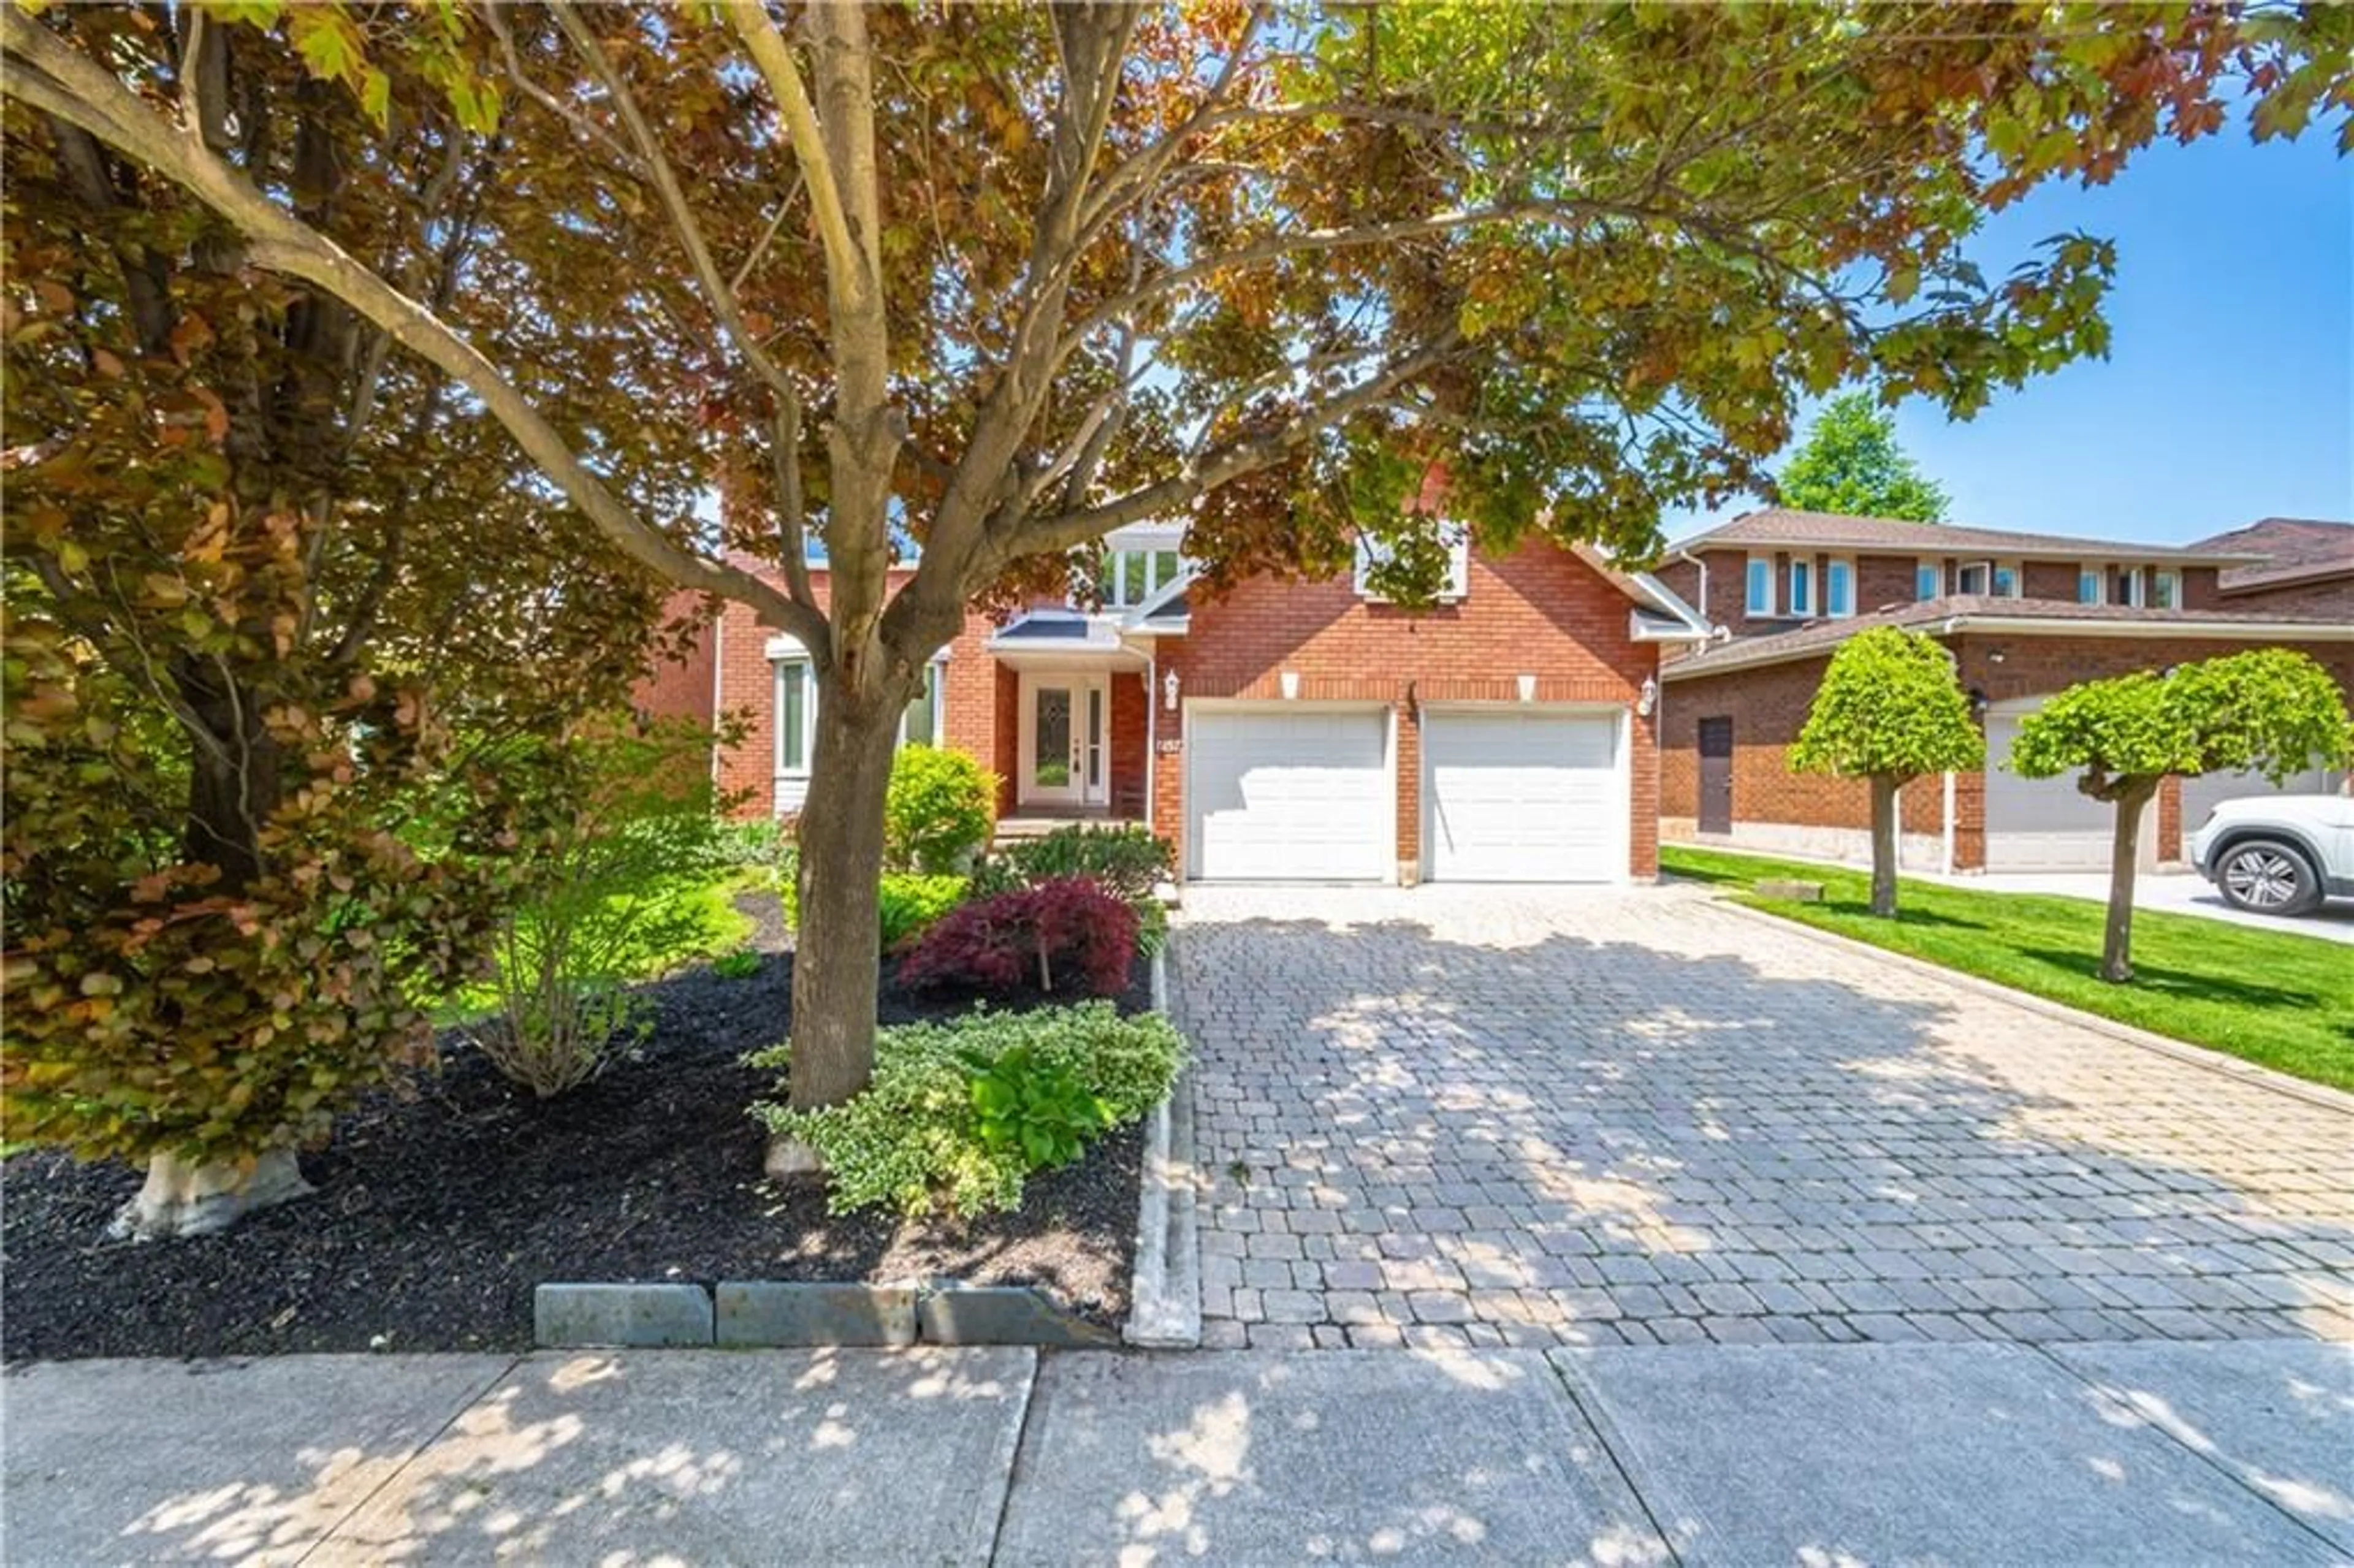 Home with brick exterior material for 1157 BEECHGROVE Cres, Oakville Ontario L6M 2B3